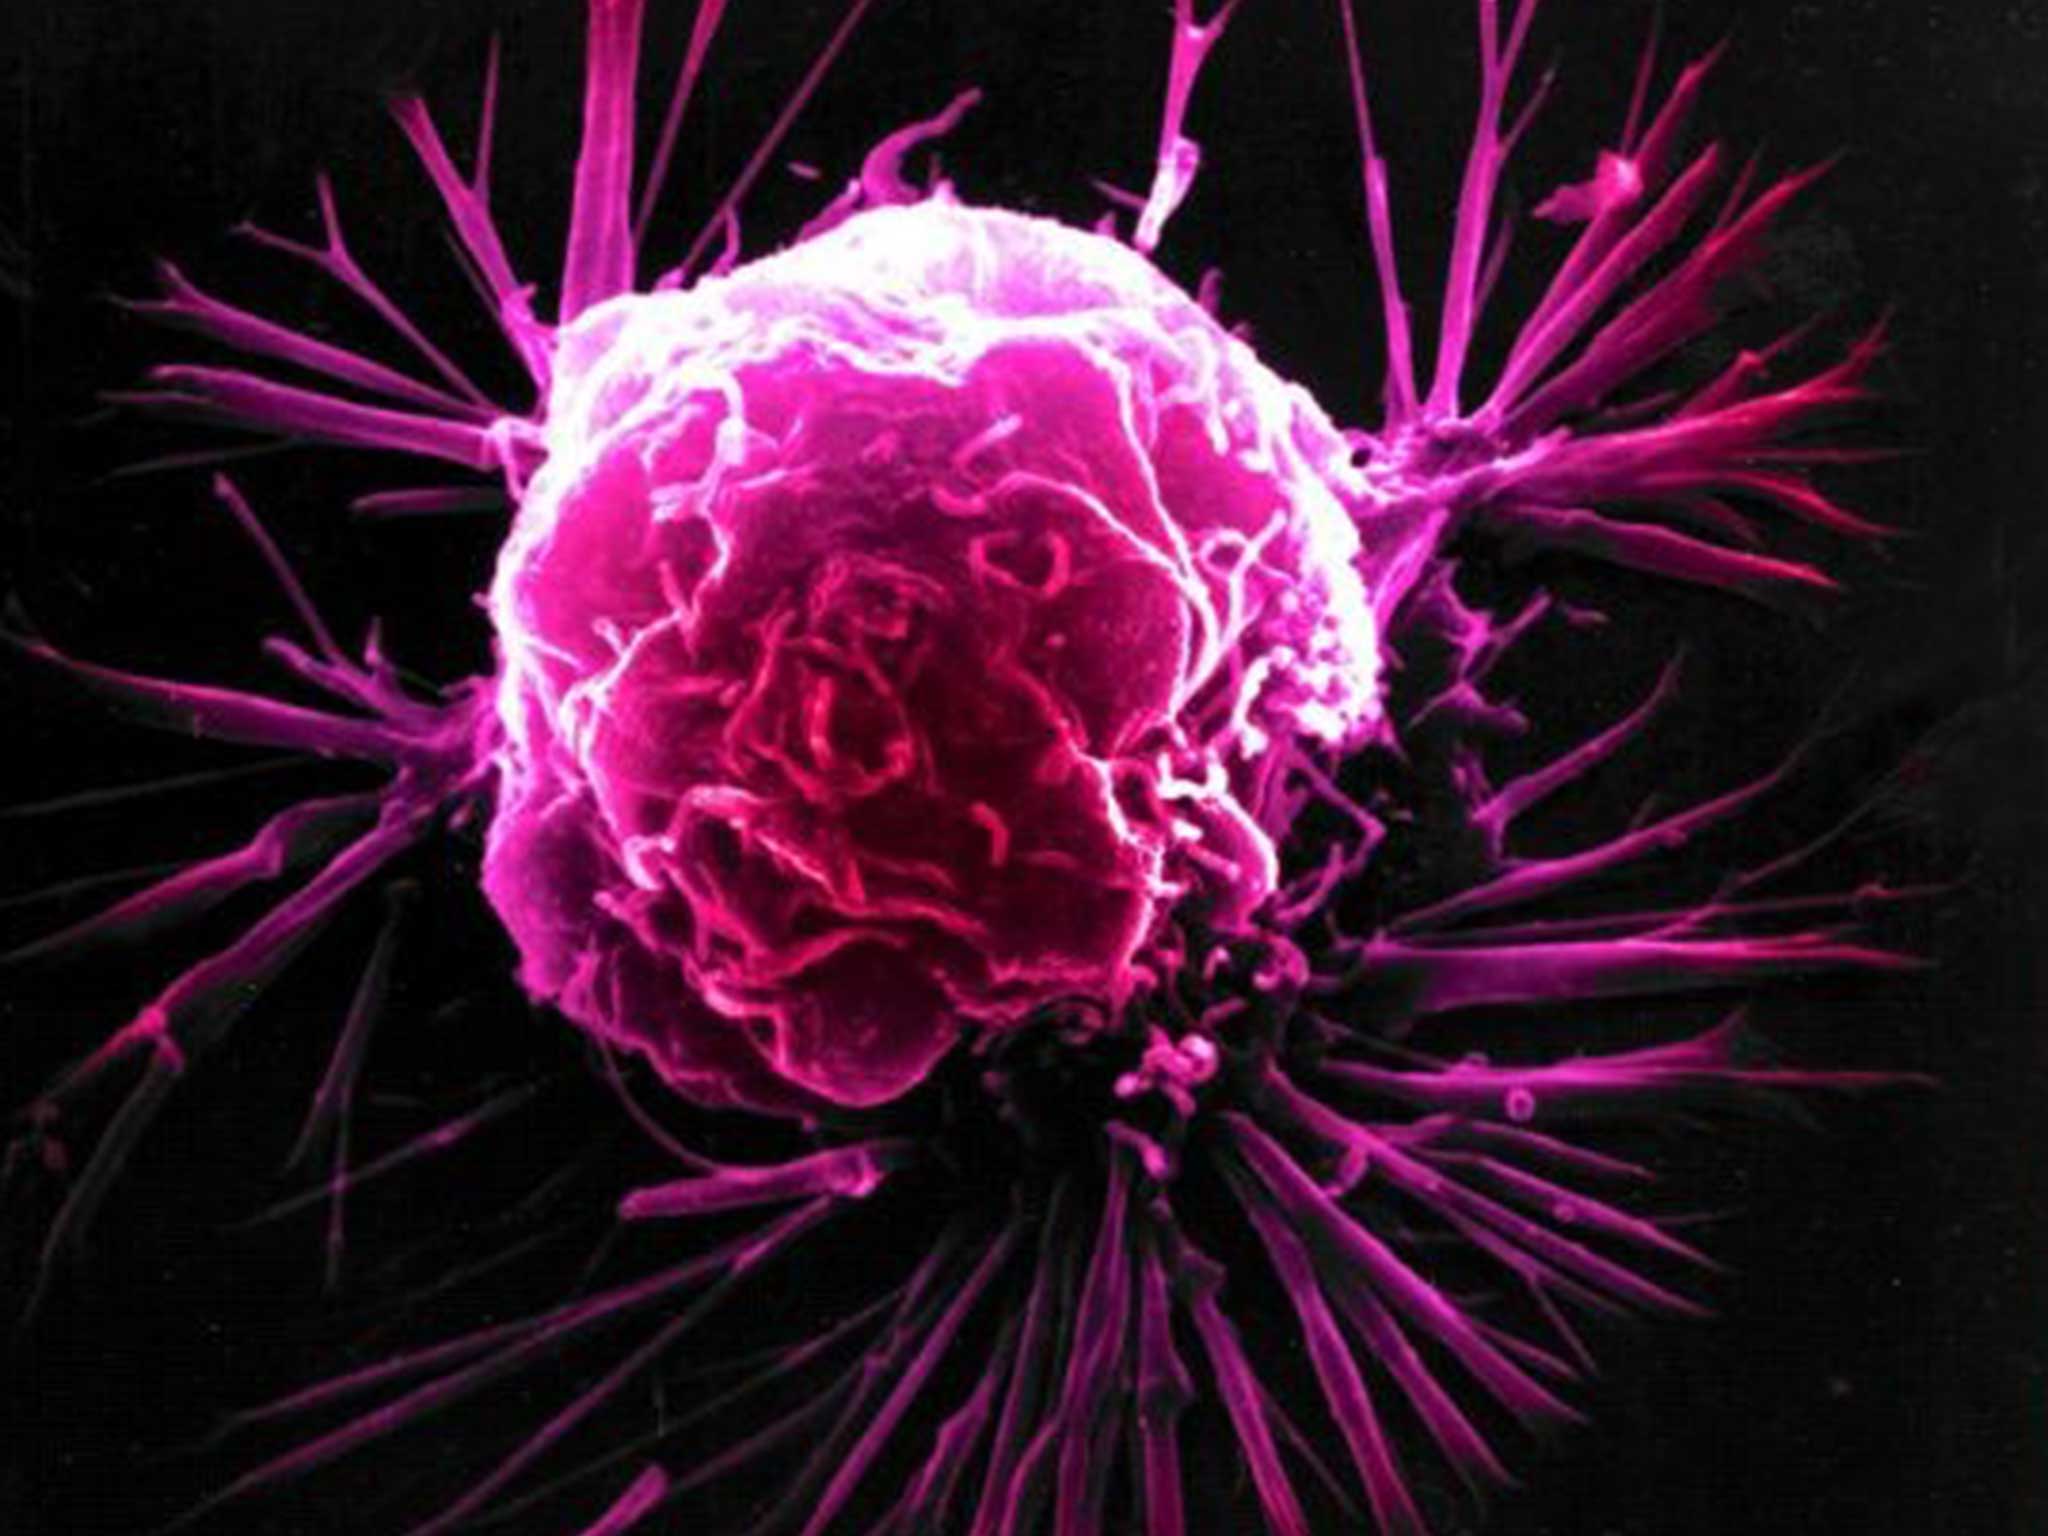 The new study drives home an important point that scientists already know how to prevent a large swath of cancer deaths